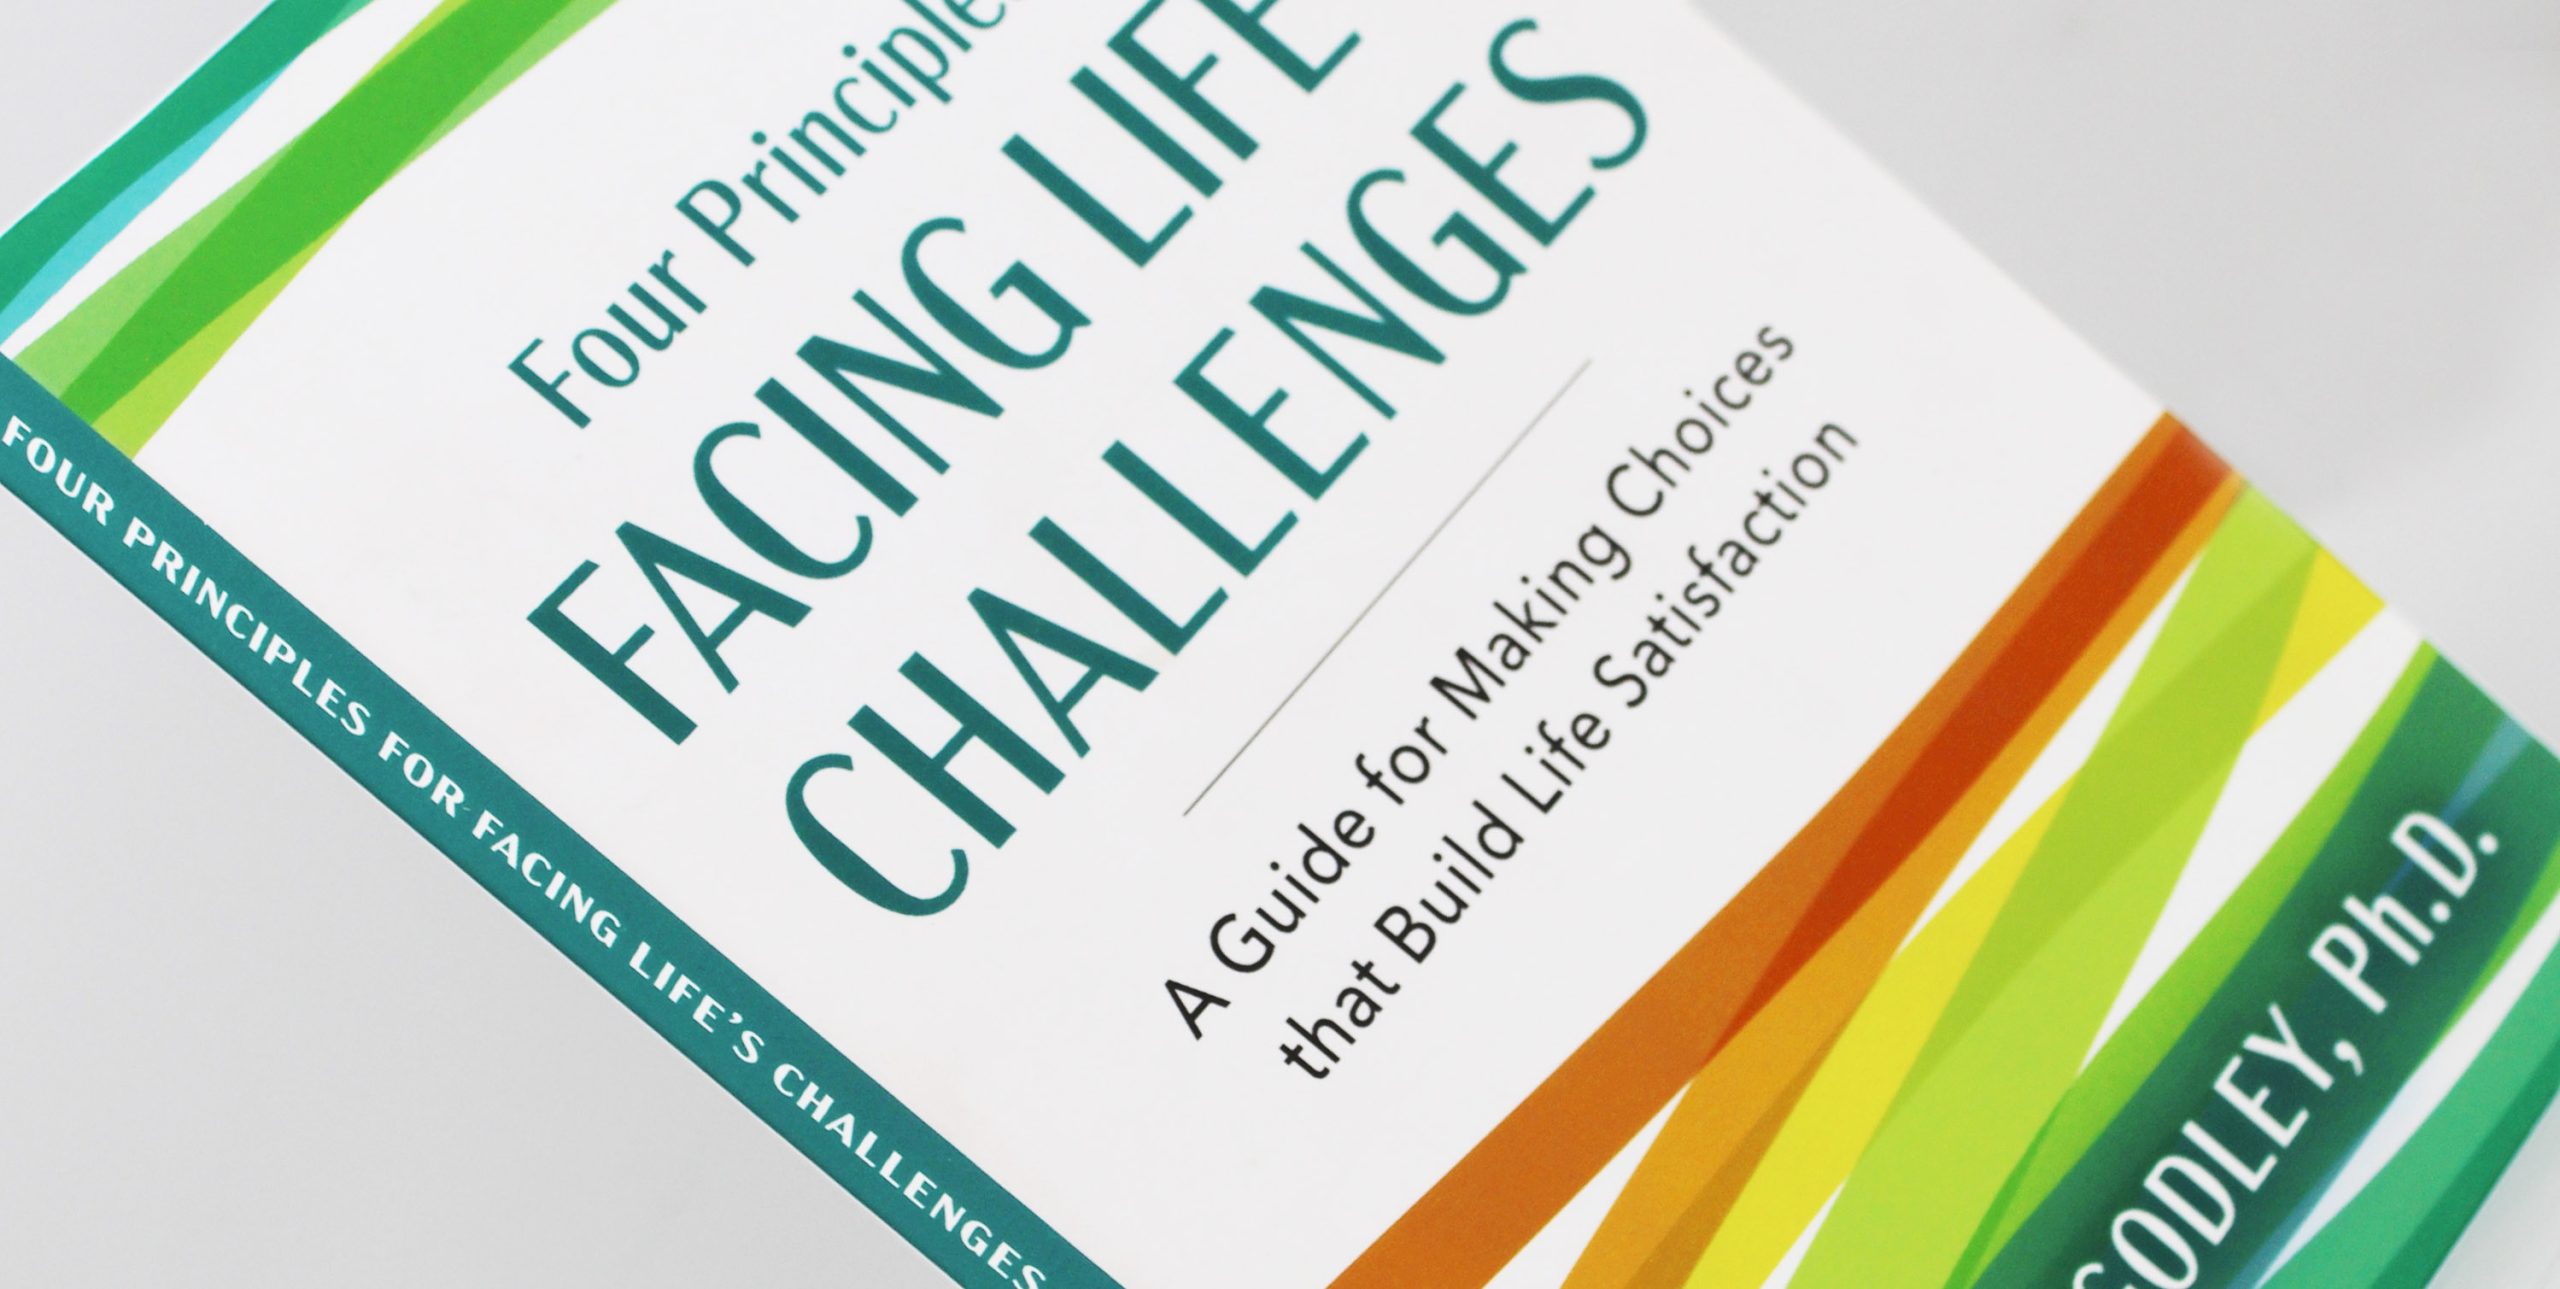 Four Principles for Facing Life's Challenges book cover